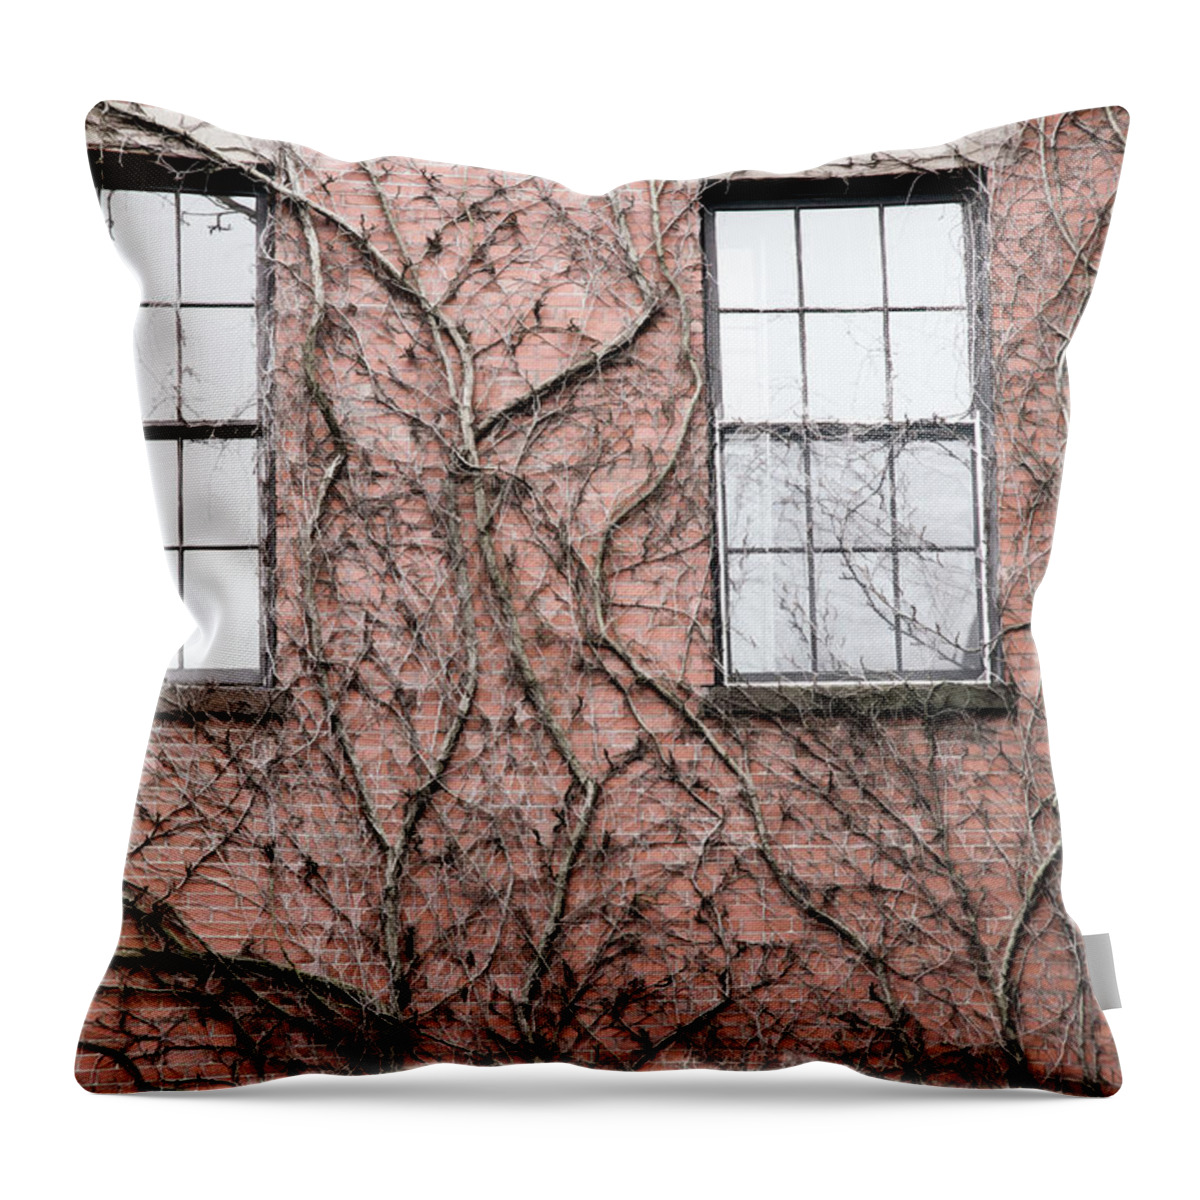 Boston Throw Pillow featuring the photograph Vines and Brick by Natalie Rotman Cote